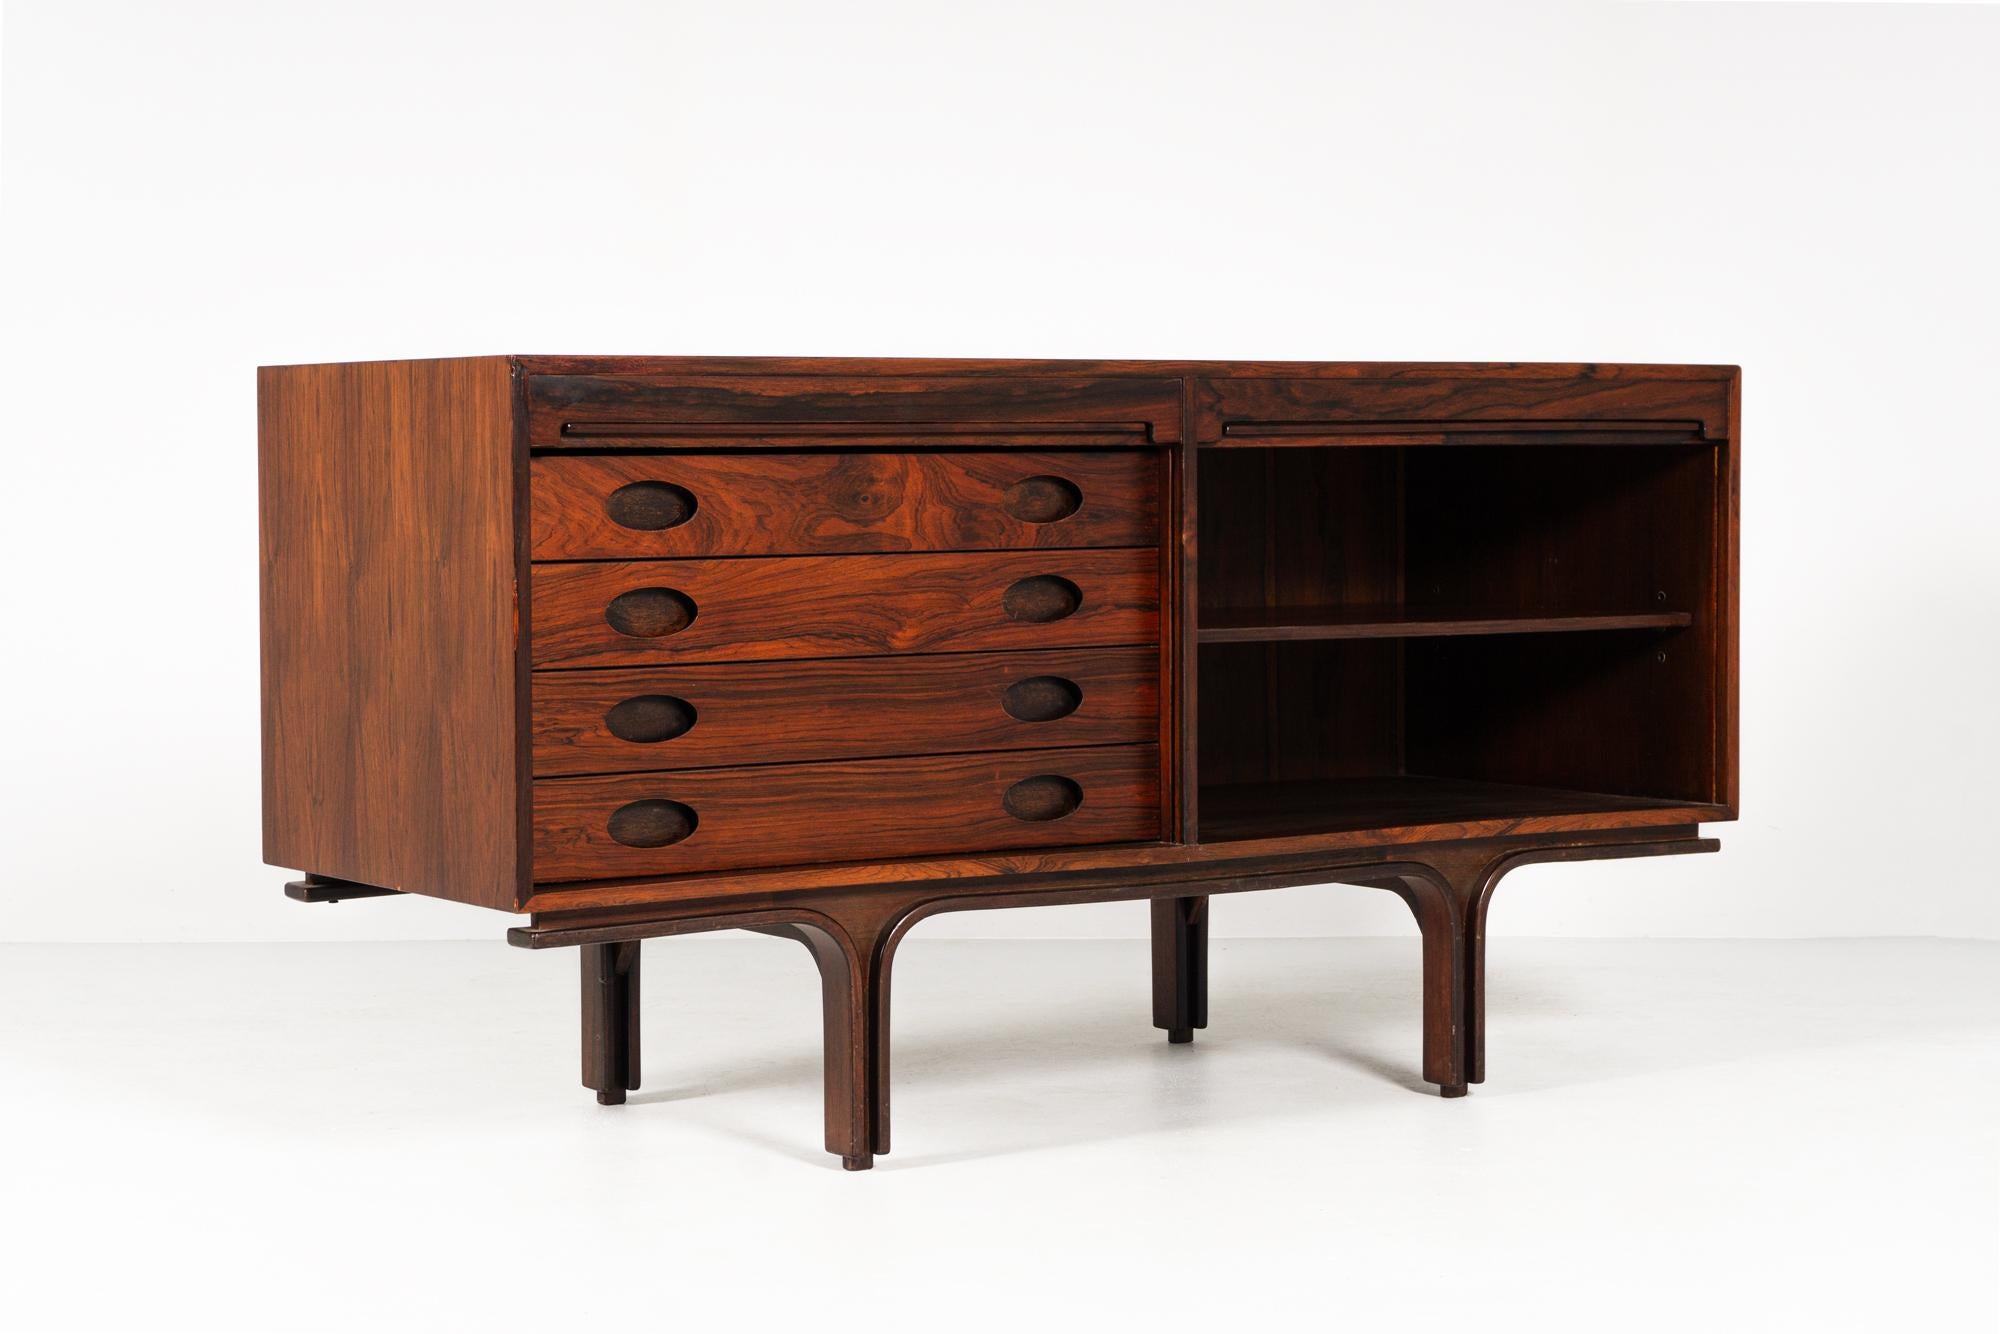 Sideboard by Gianfranco Frattini, Bernini Italy, 1961

Materials & Techniques Notes: rosewood, 
2 tambour style roll down fronts, 
4 drawers,
free-standing